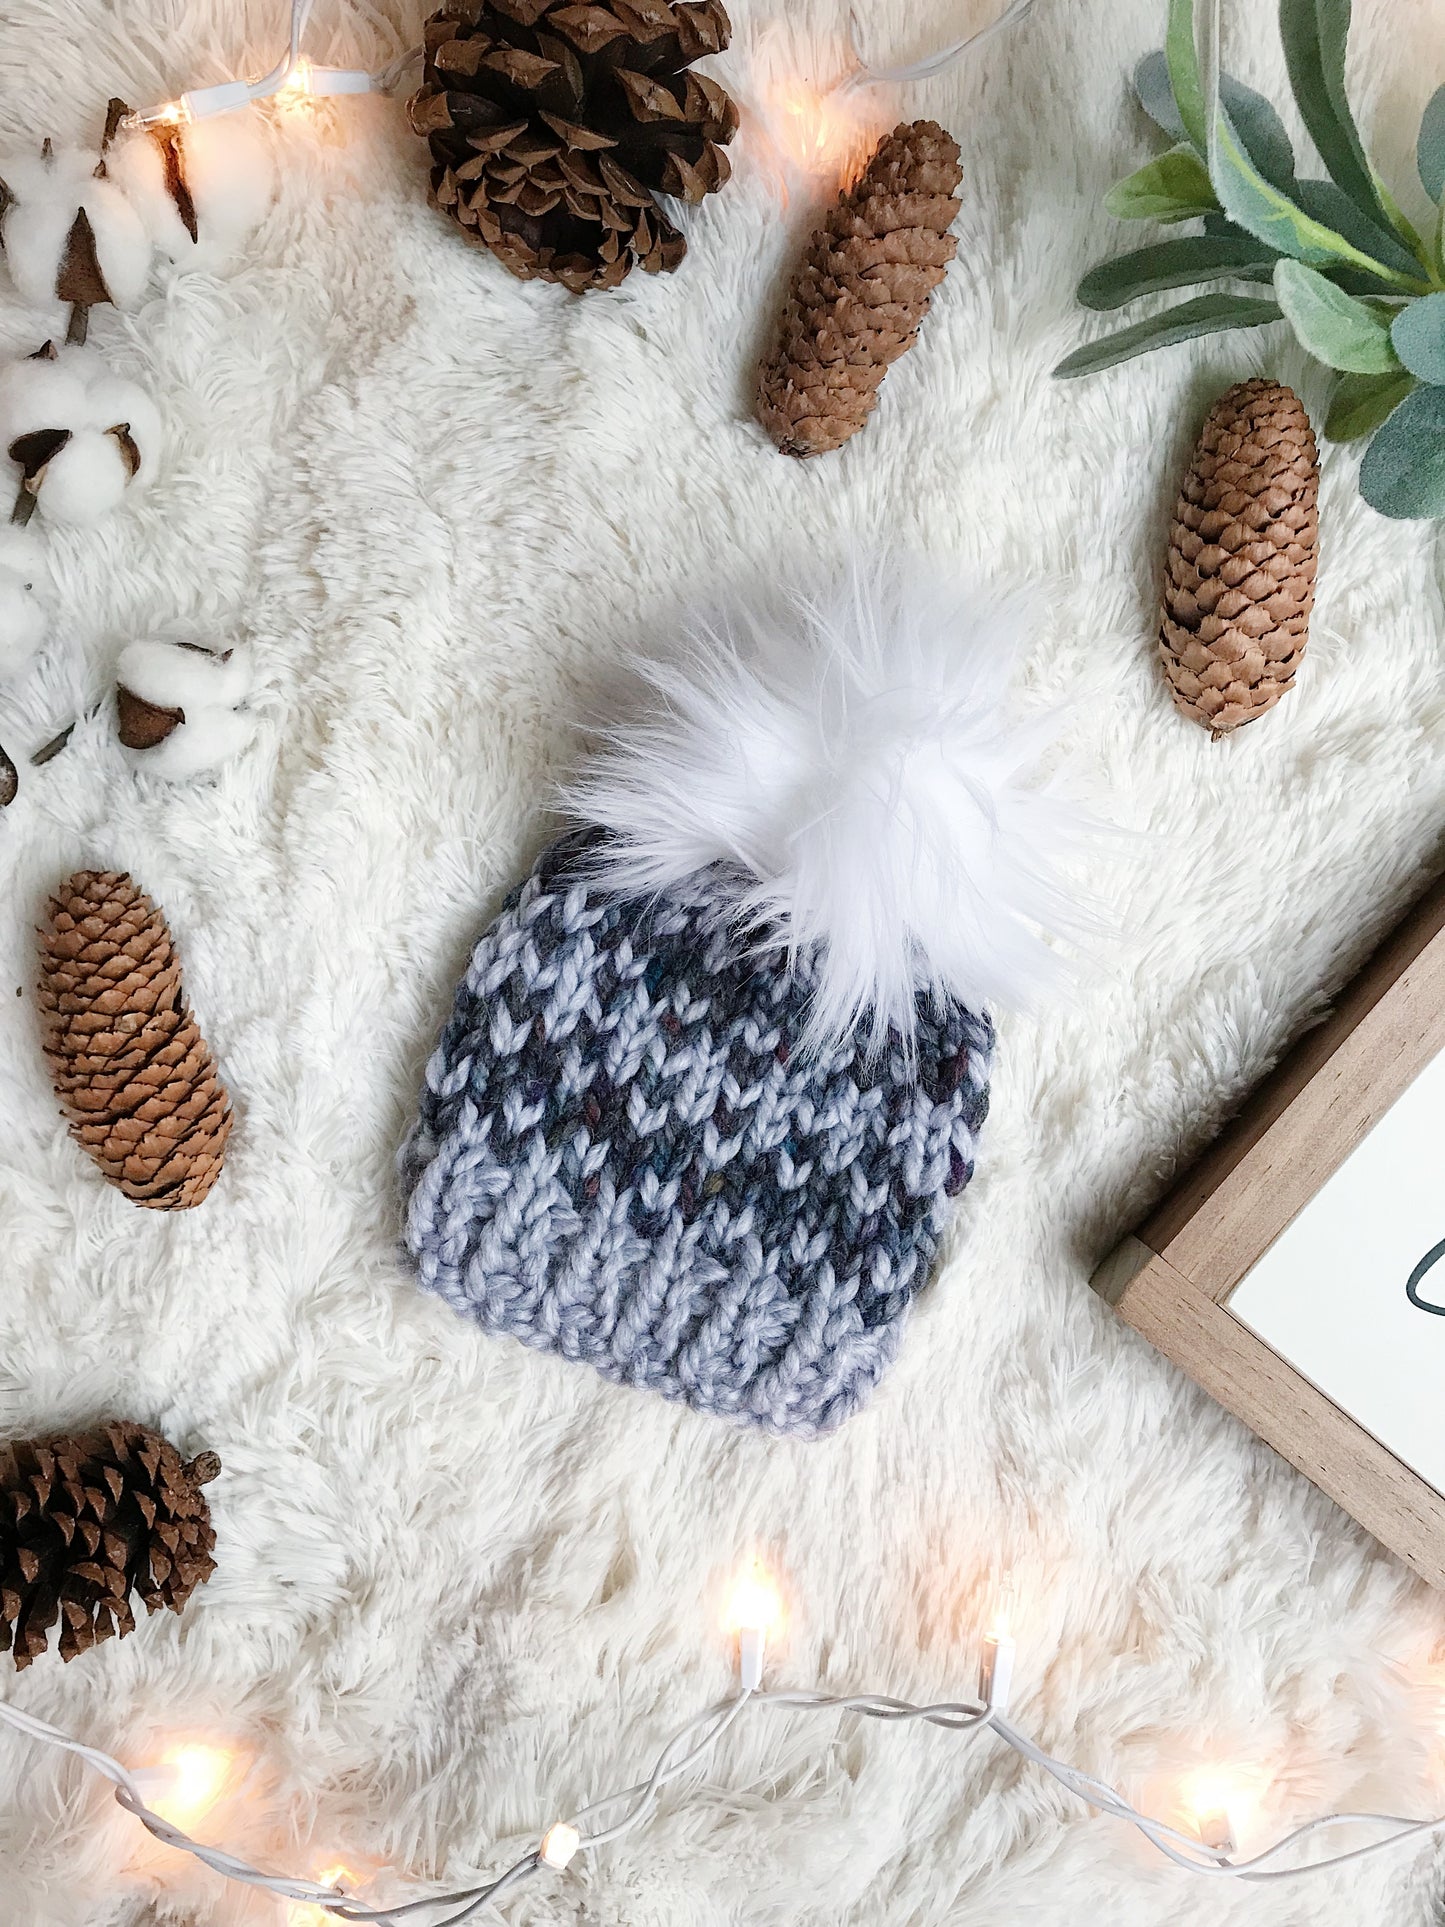 Baby Knitted Fair Isle Beanie with Faux Fur Pom Pom // The Lil Hallowell